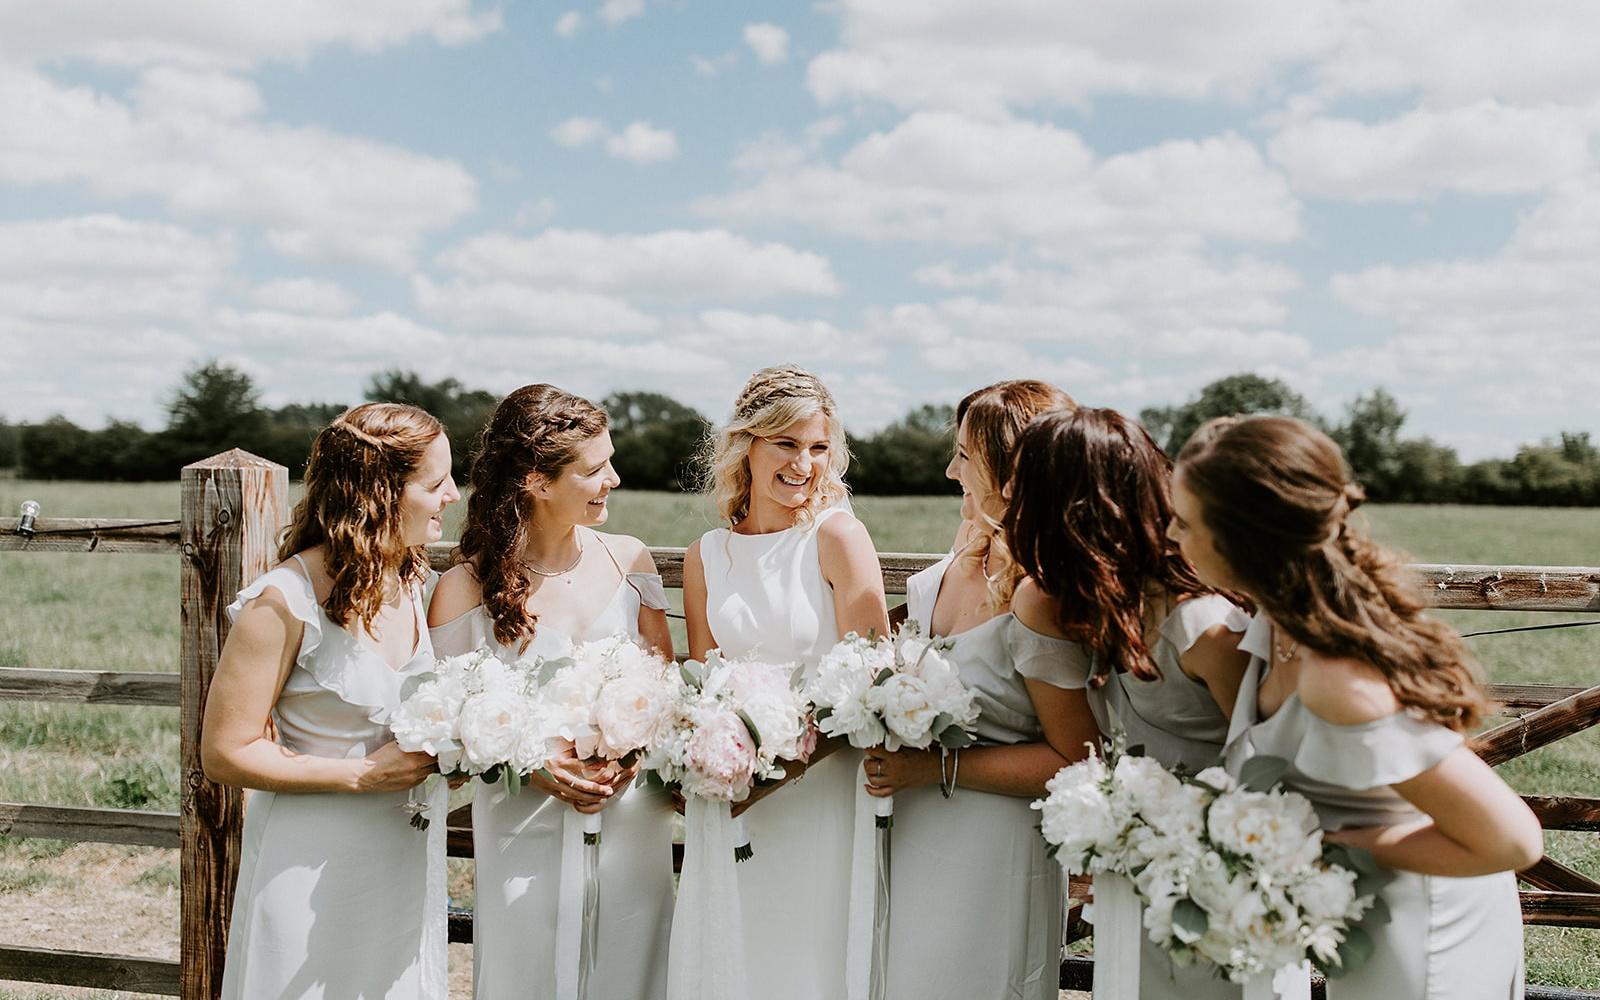 Real wedding Corky and Prince flowers florist stylist Gloucestershire Jenner's Barn Fairford Barn reception bride trip white bridesmaid dresses